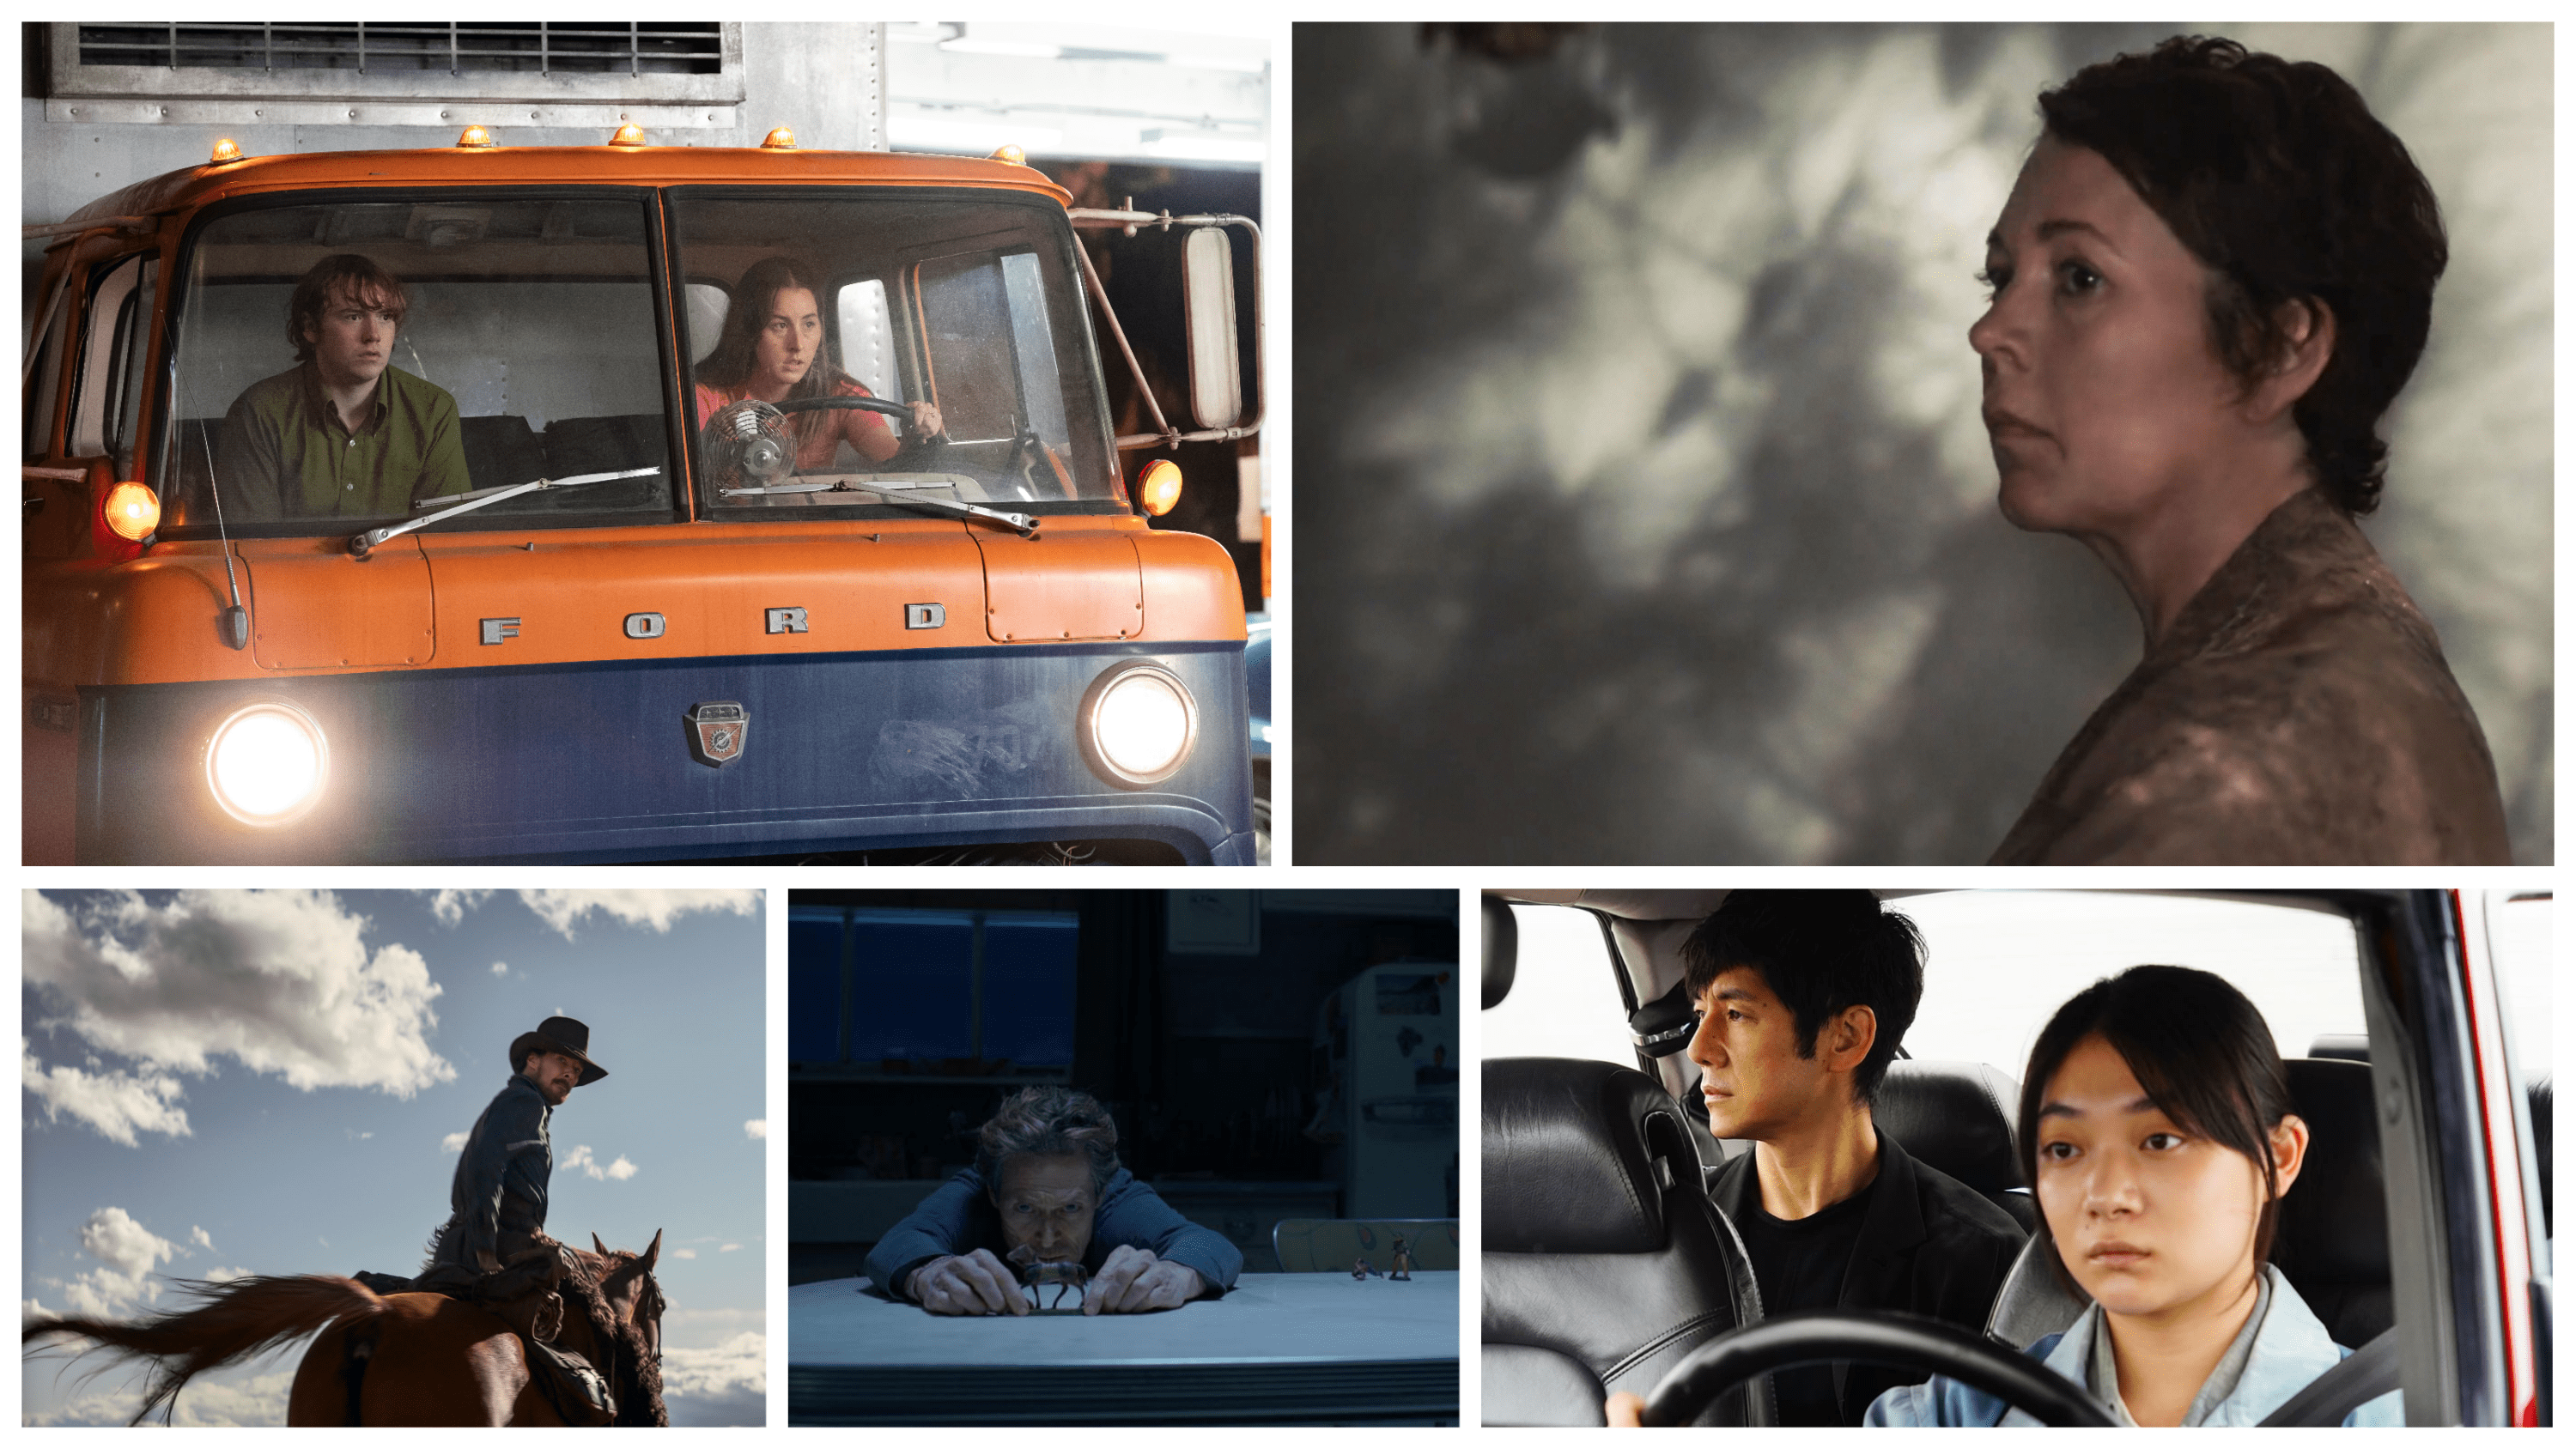 Clockwise from top left: "Licorice Pizza" (Courtesy Melinda Sue Gordon/Metro-Goldwyn-Mayer Pictures Inc.); "The Lost Daughter" (Courtesy Yannis Drakoulidis/Netflix); "Drive My Car" (Courtesy Janus Films); "Siberia" (Courtesy Lionsgate); "The Power of the Dog" (Courtesy Netflix).